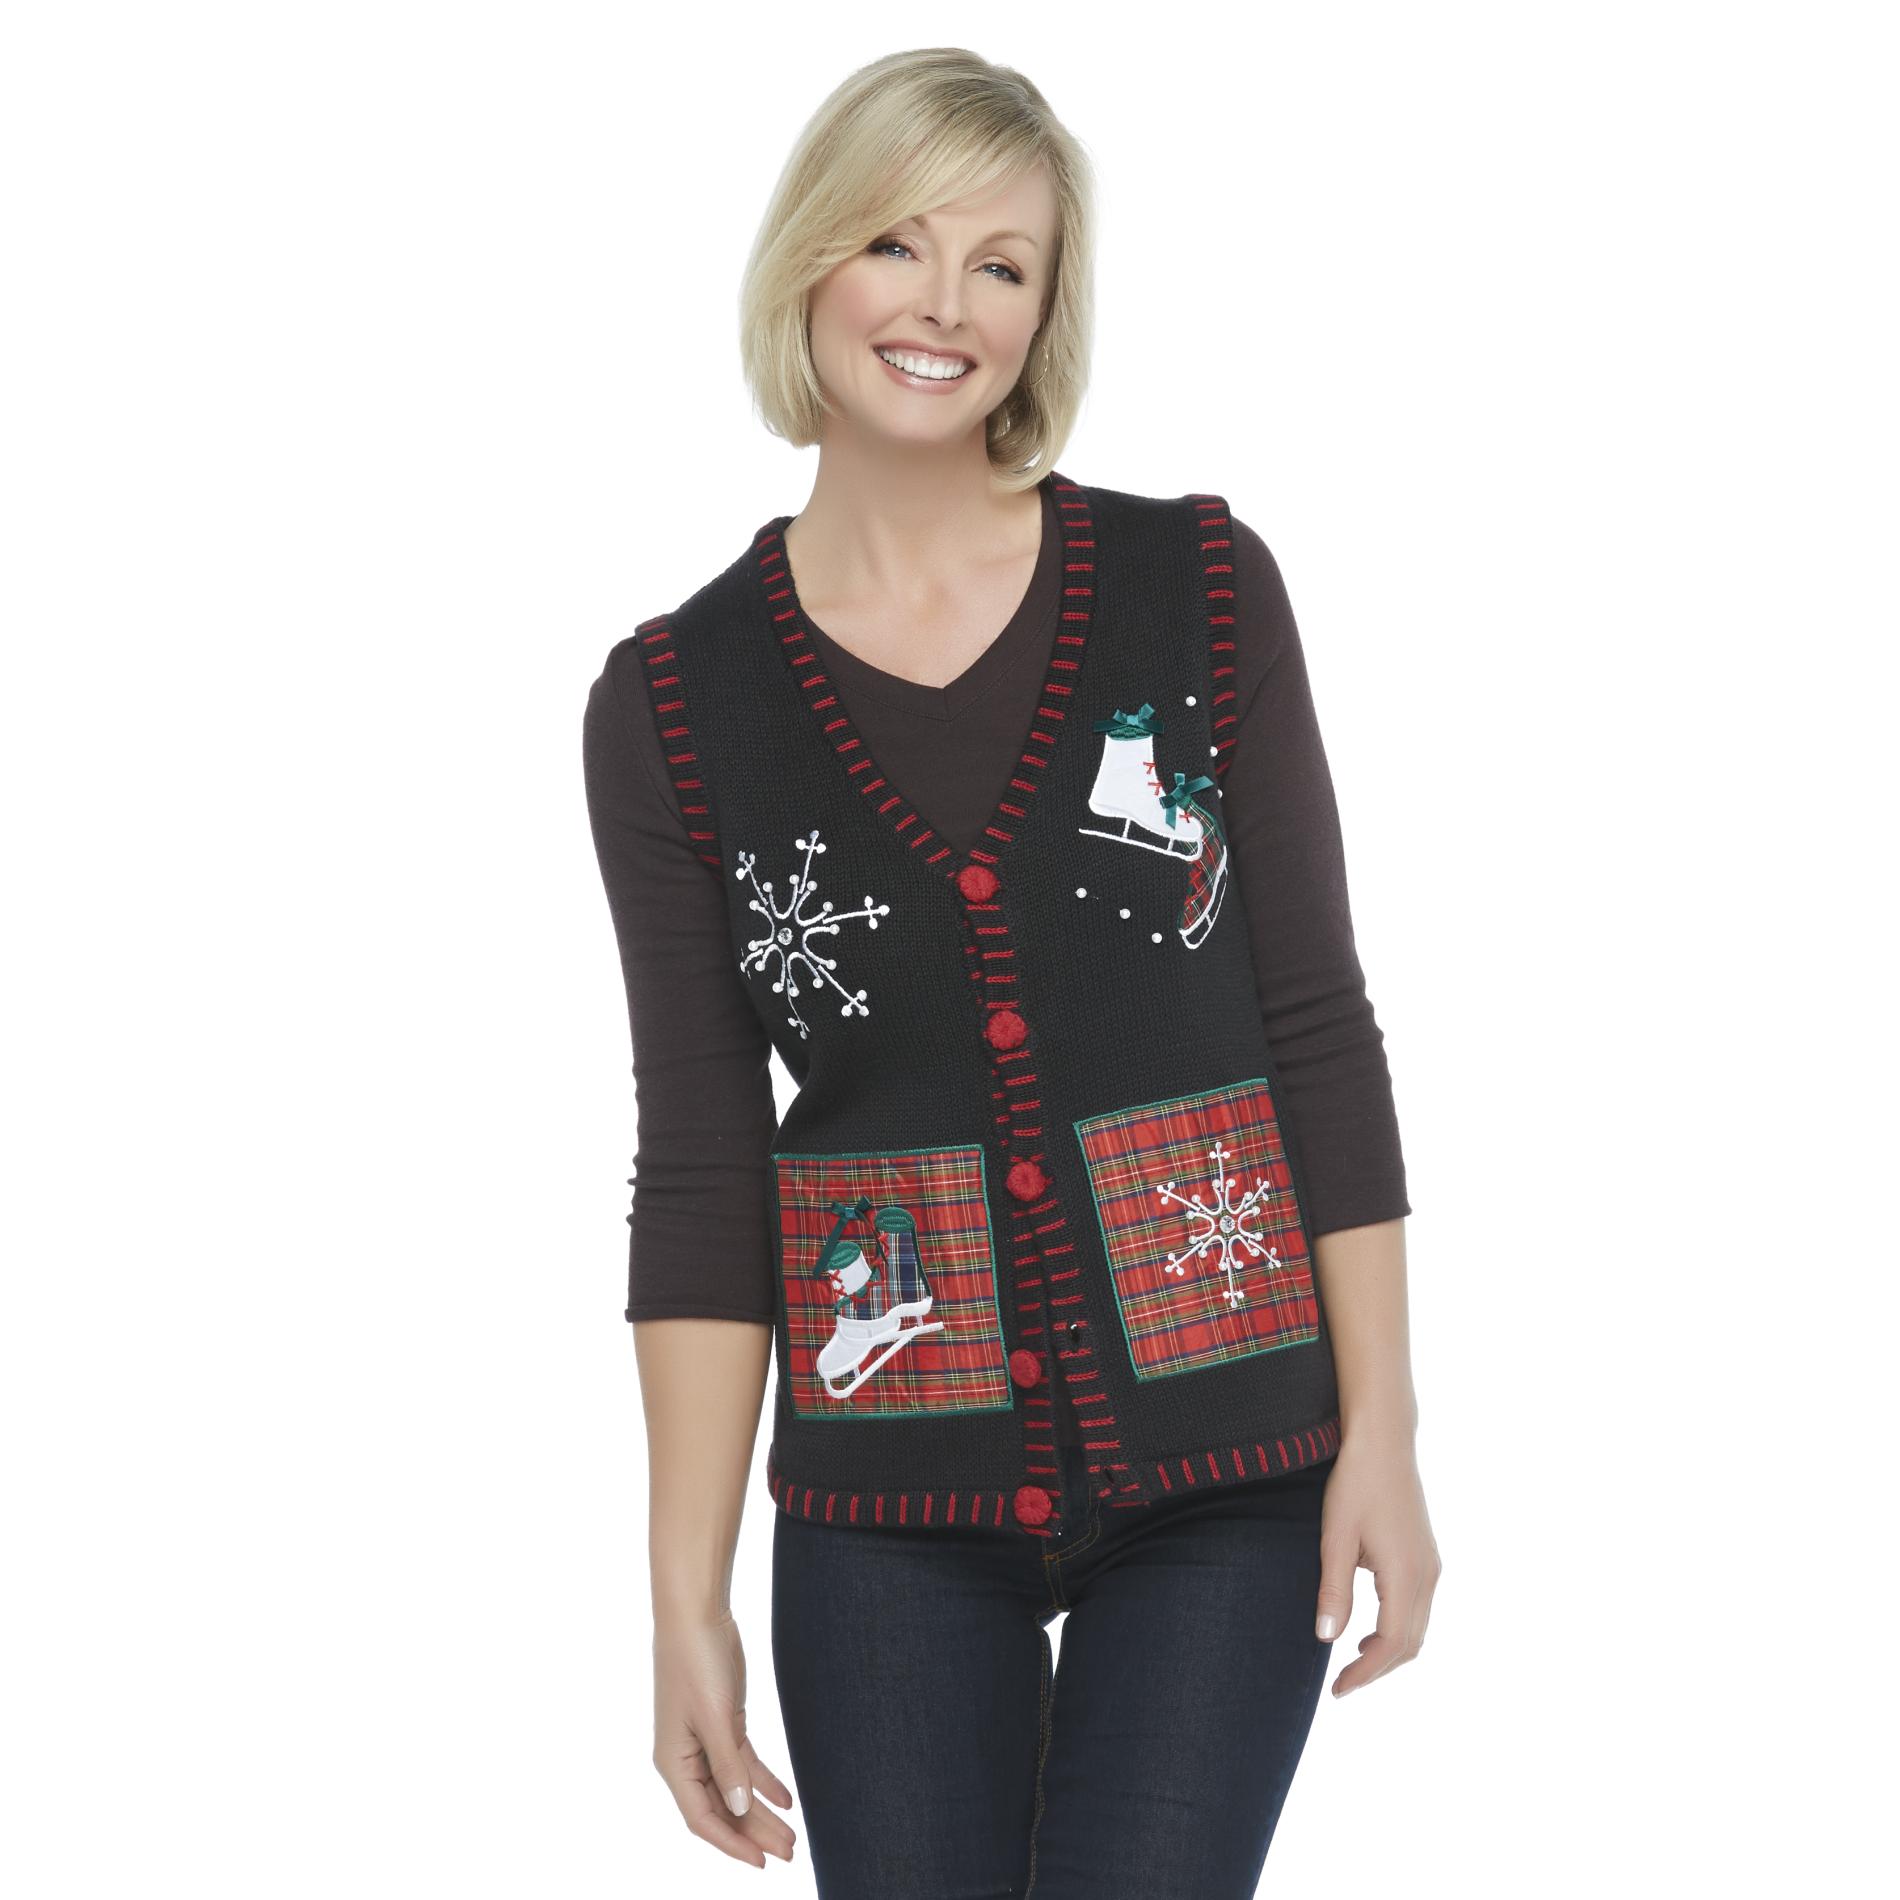 Holiday Editions Women's Sweater Vest - Ice Skates & Christmas Snowflakes